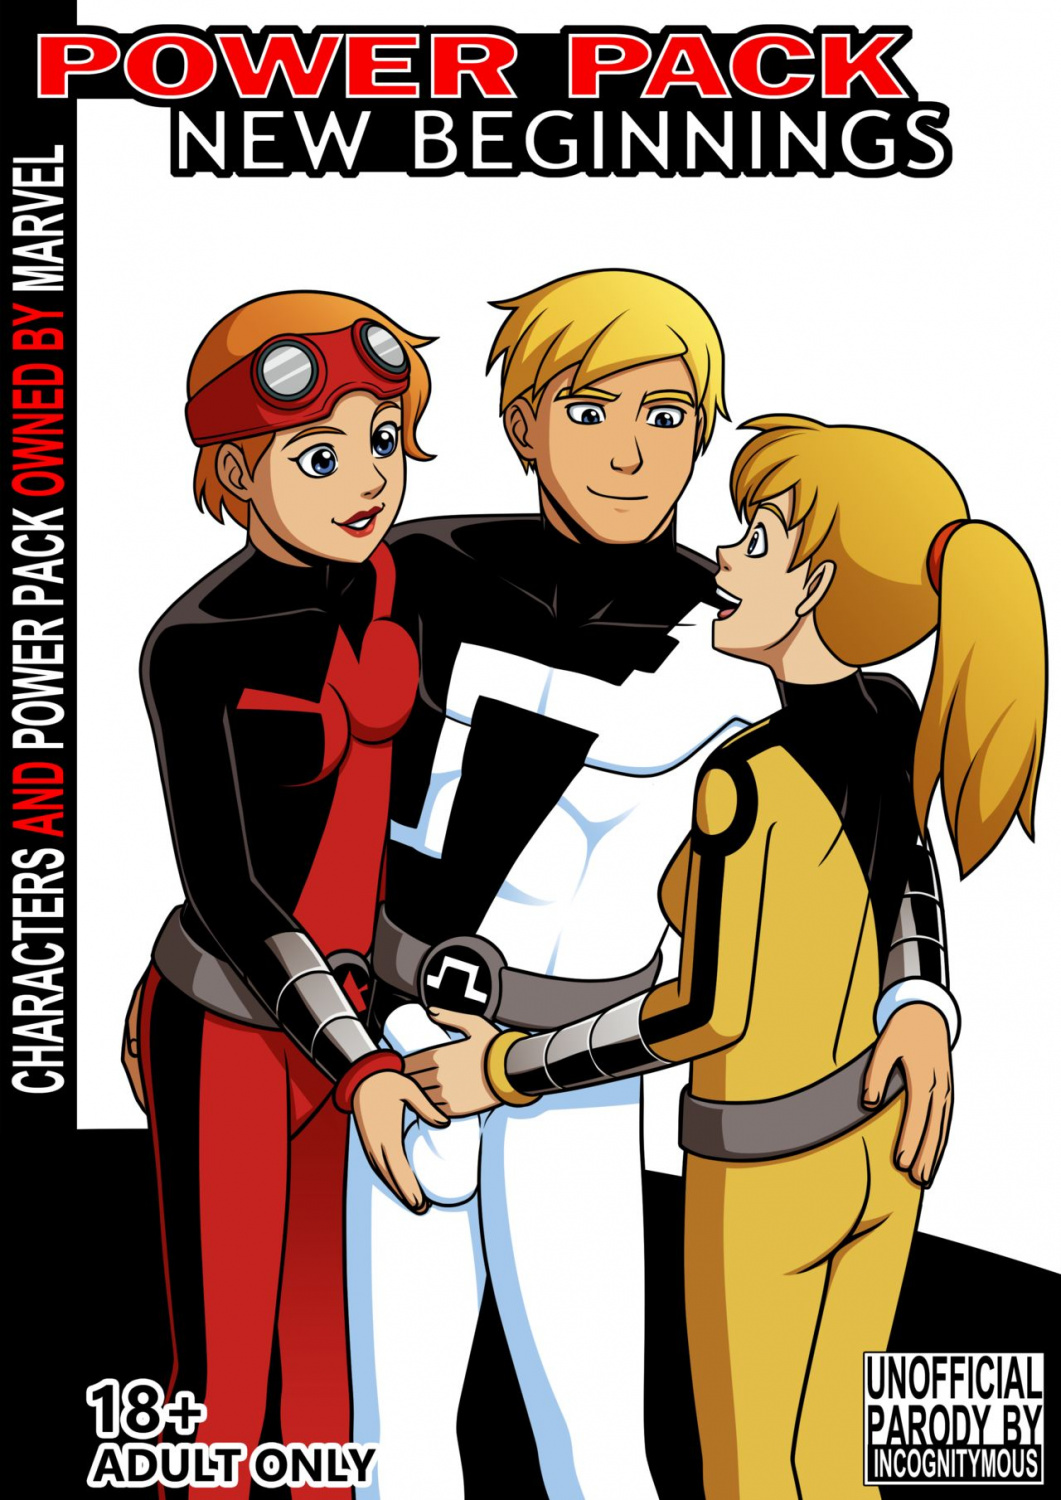 Power Pack - New Beginnings porn comics Oral sex, Anal Sex, Double Penetration, Group Sex, Masturbation, Sci-Fi, Sex Toys